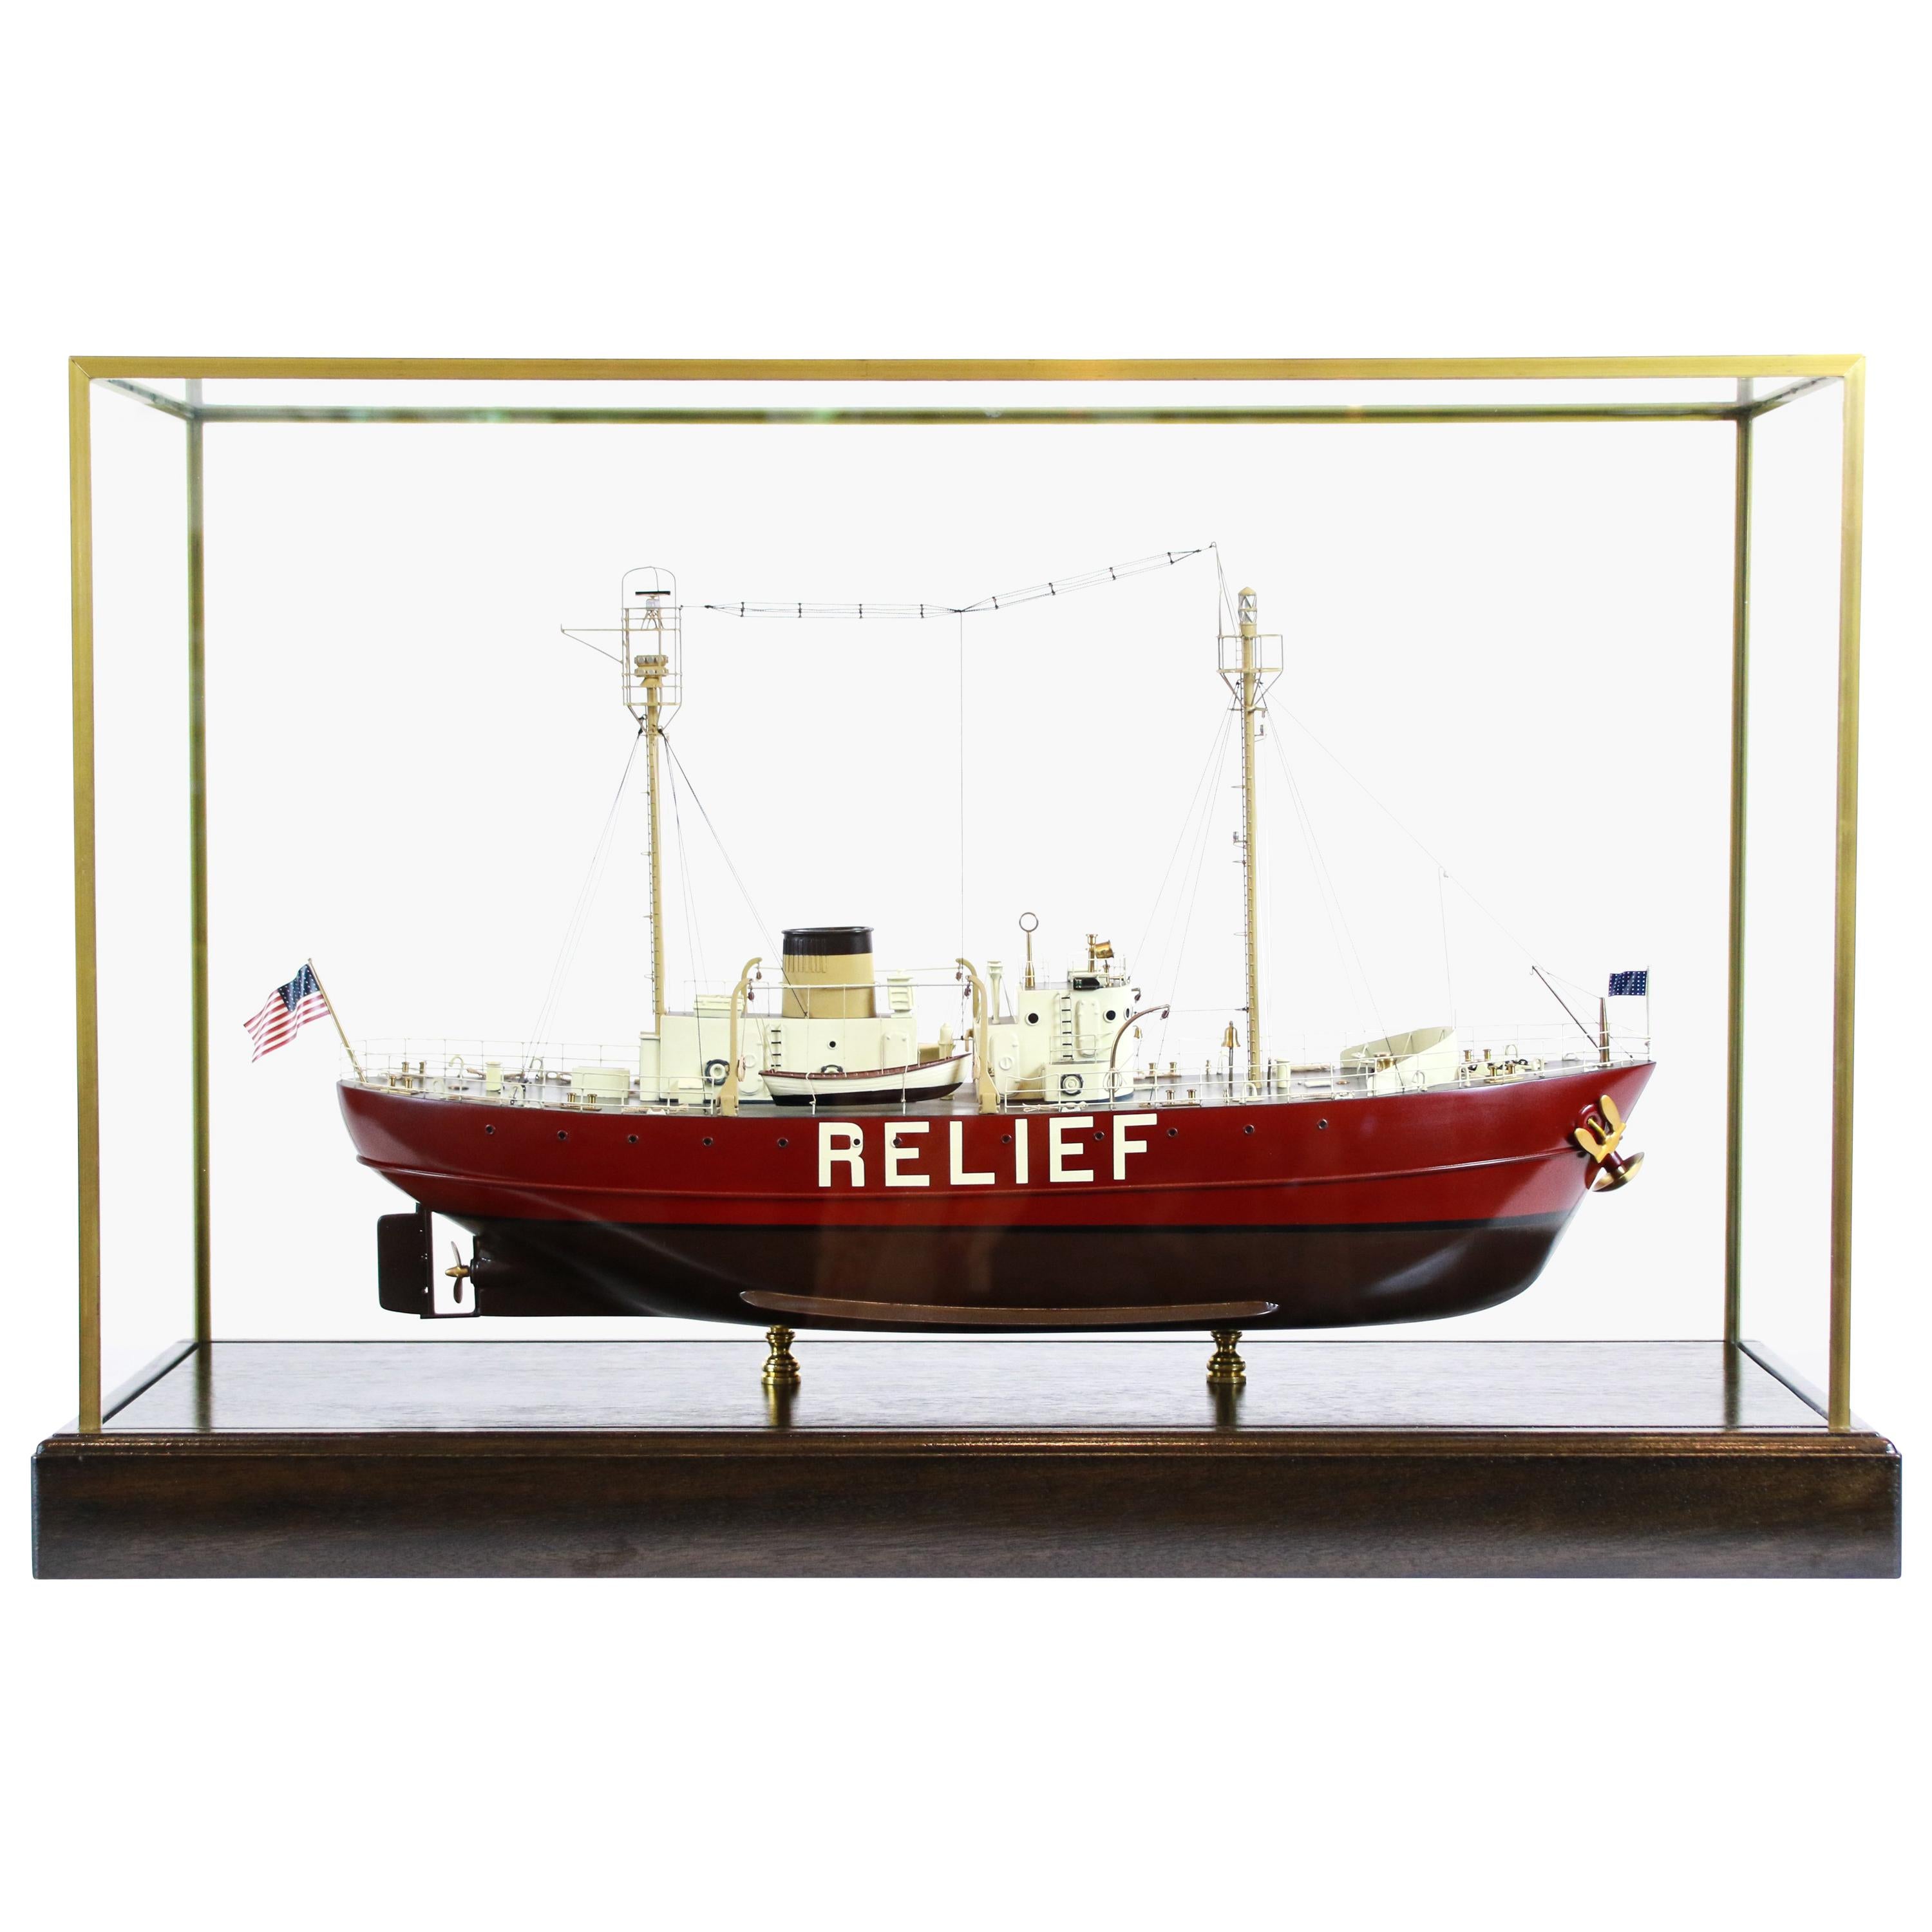 Lightship "Relief" of Oakland, California For Sale